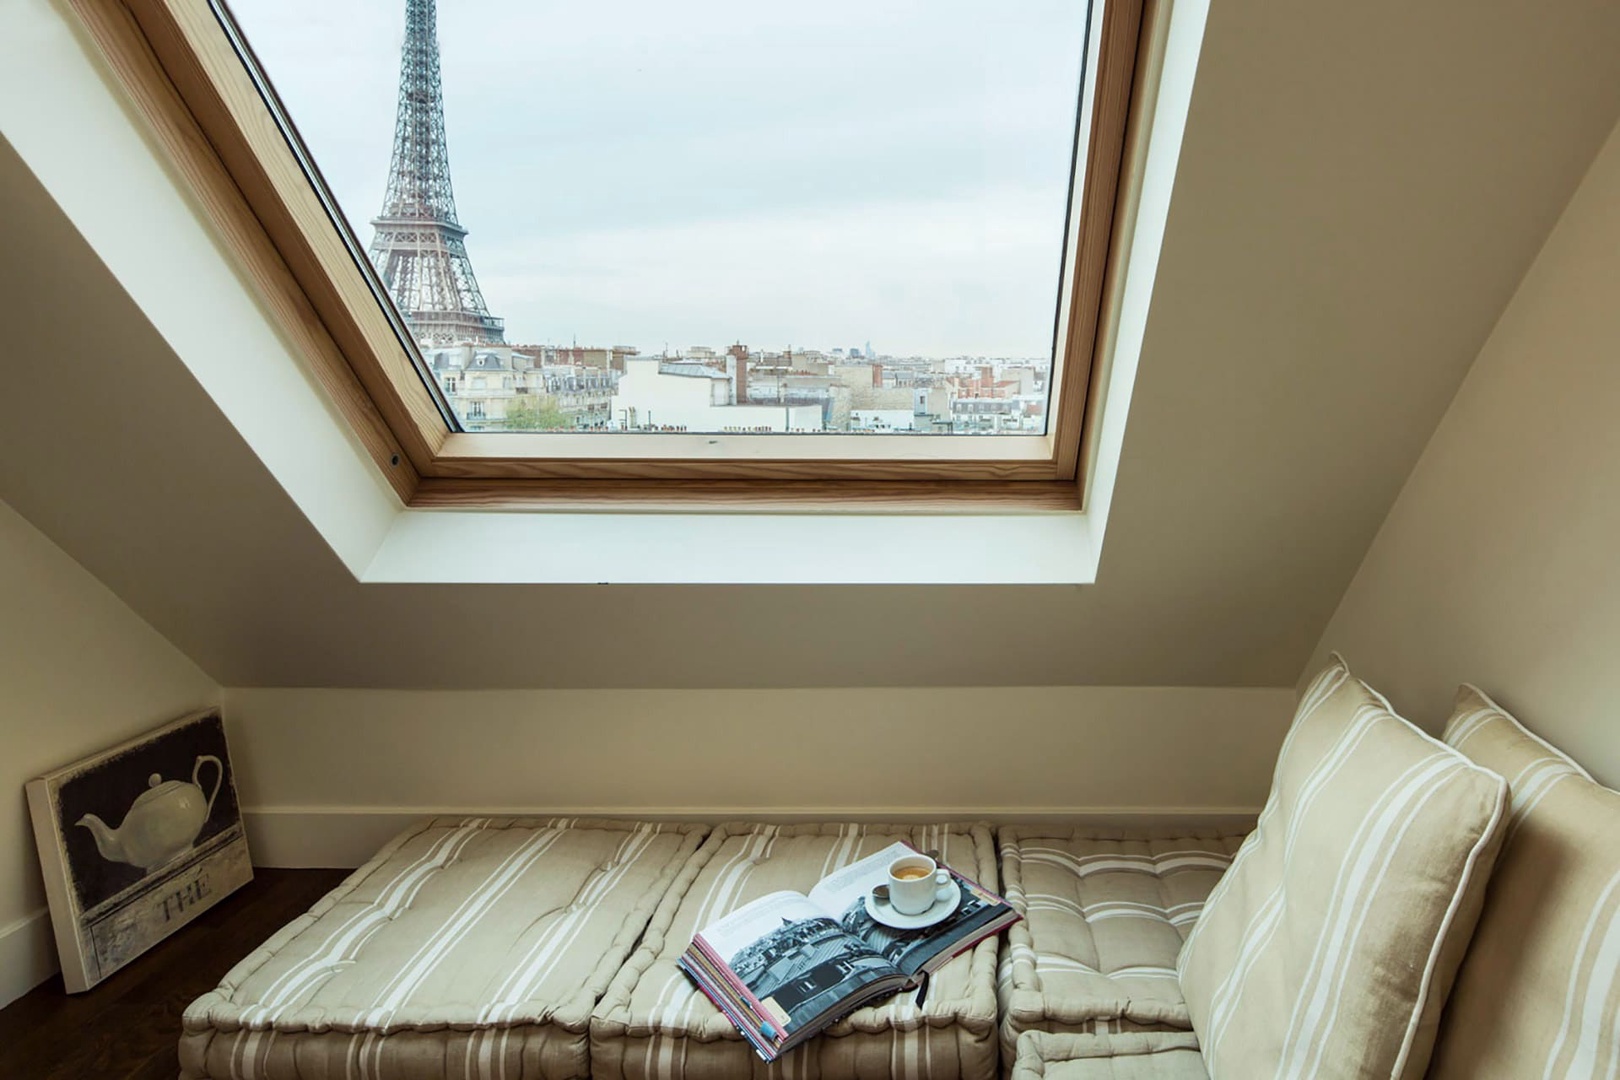 Enjoy beautiful Eiffel Tower views from the seating gallery of bedroom 2.